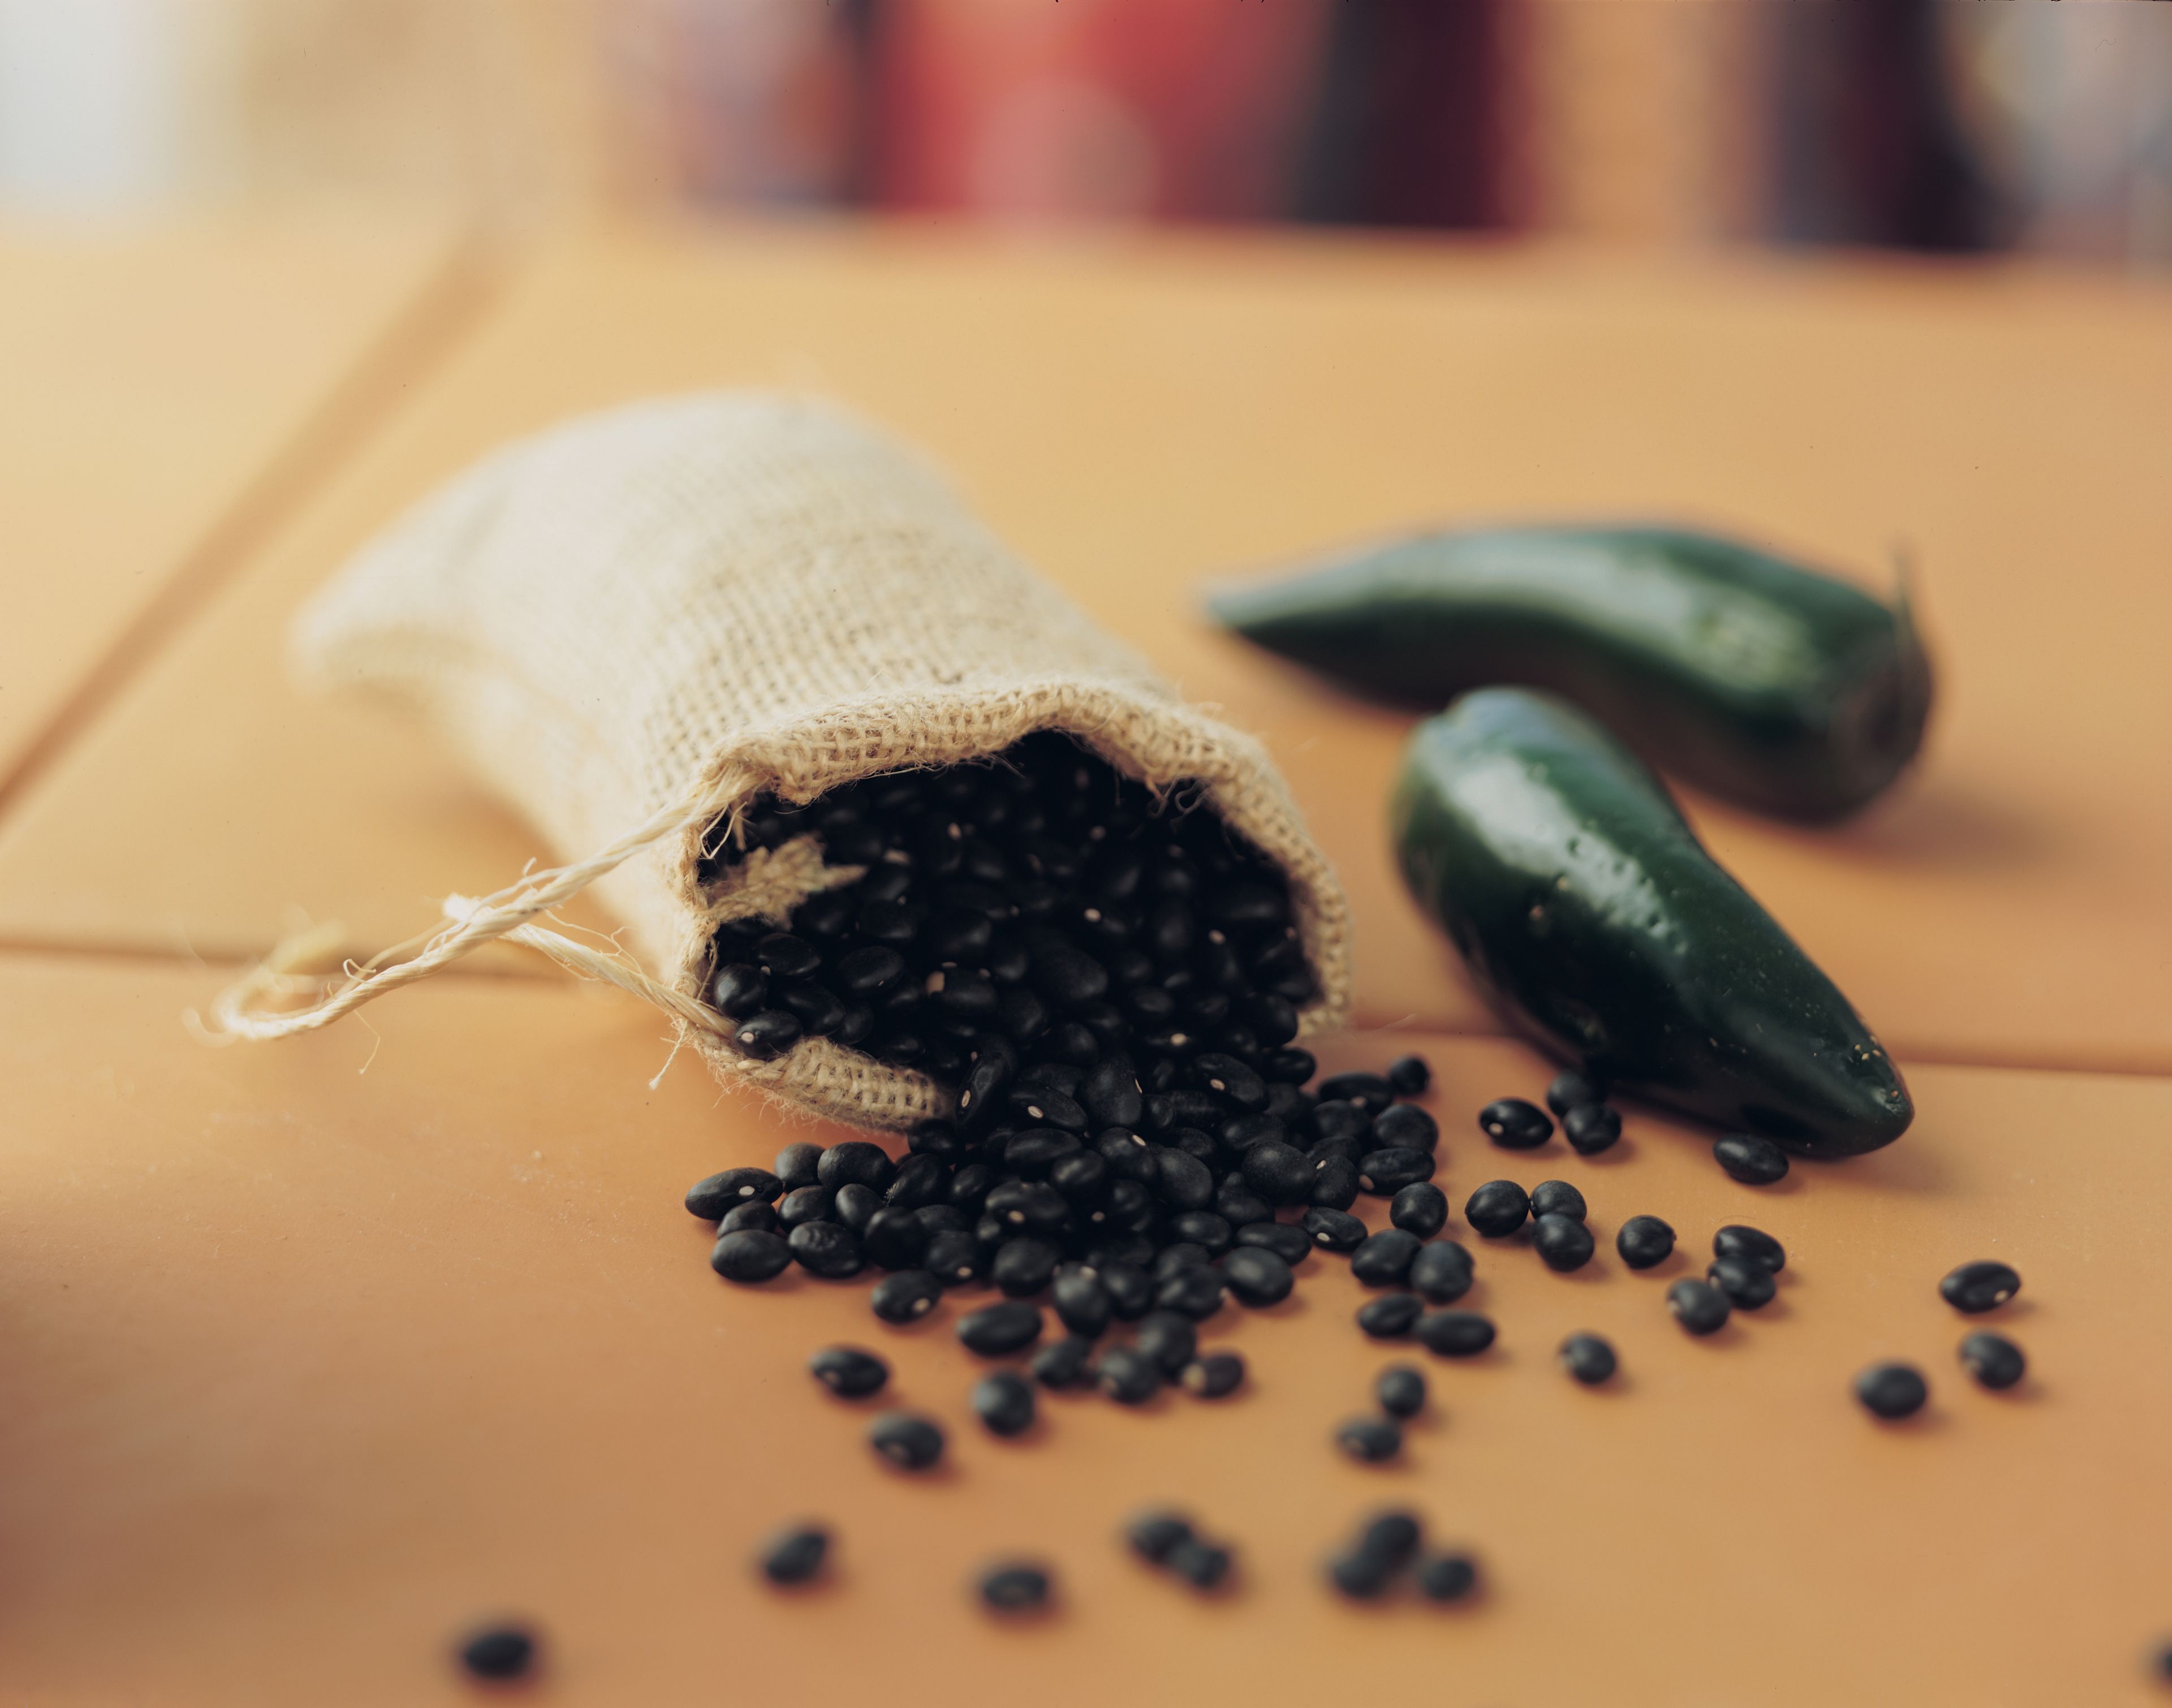 A bag of black beans and peppers.